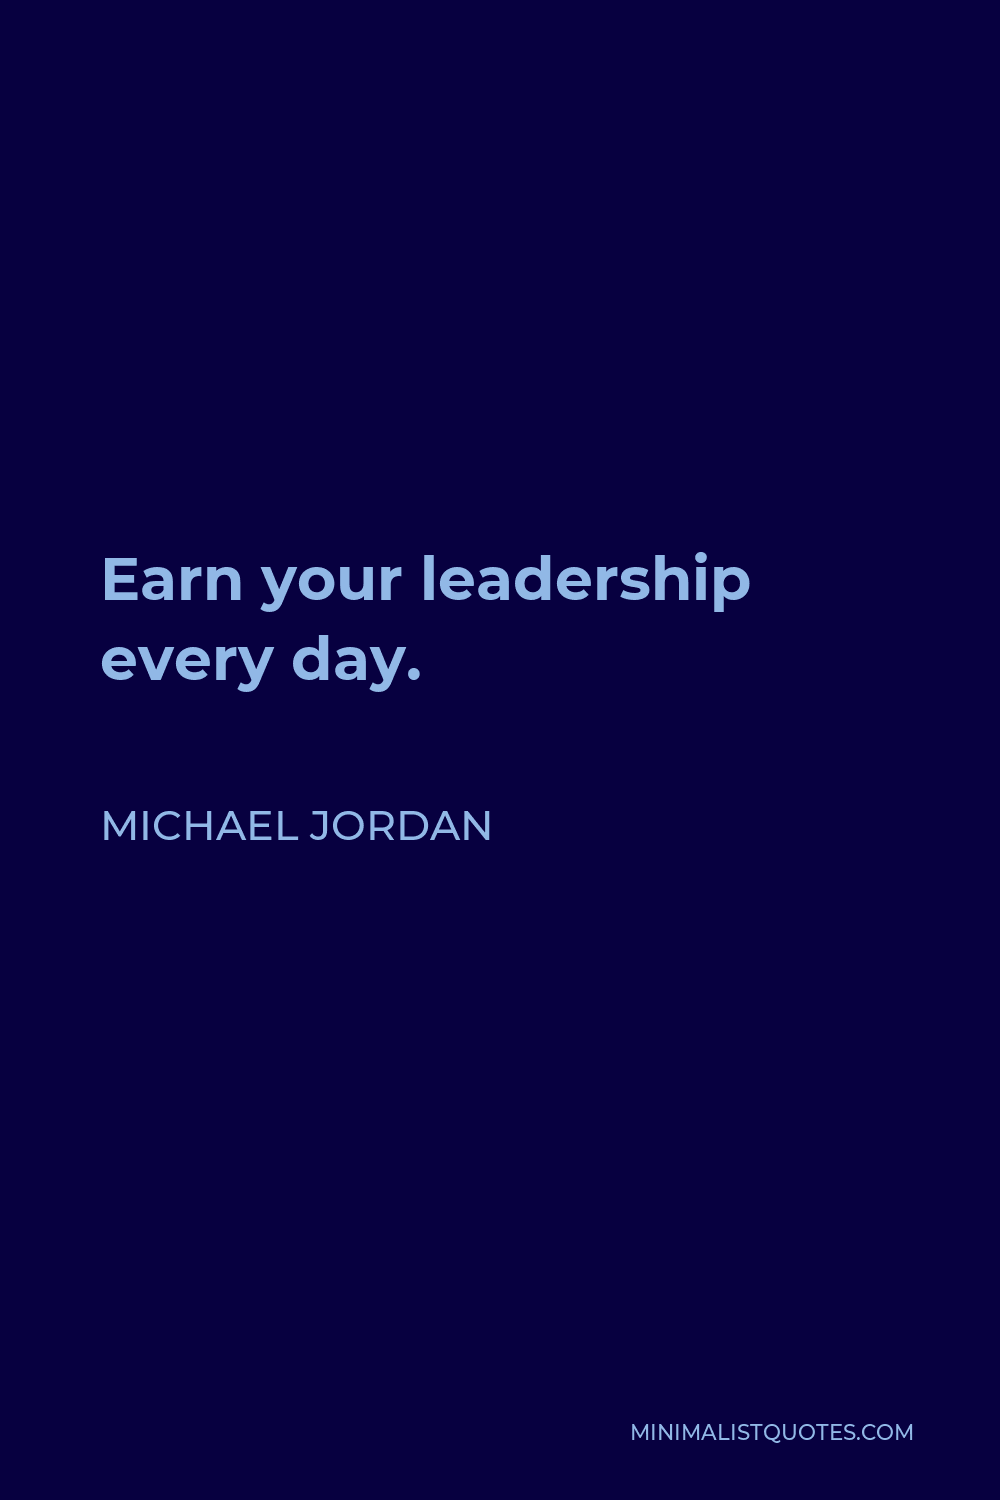 Michael Jordan Quote - Earn your leadership every day.